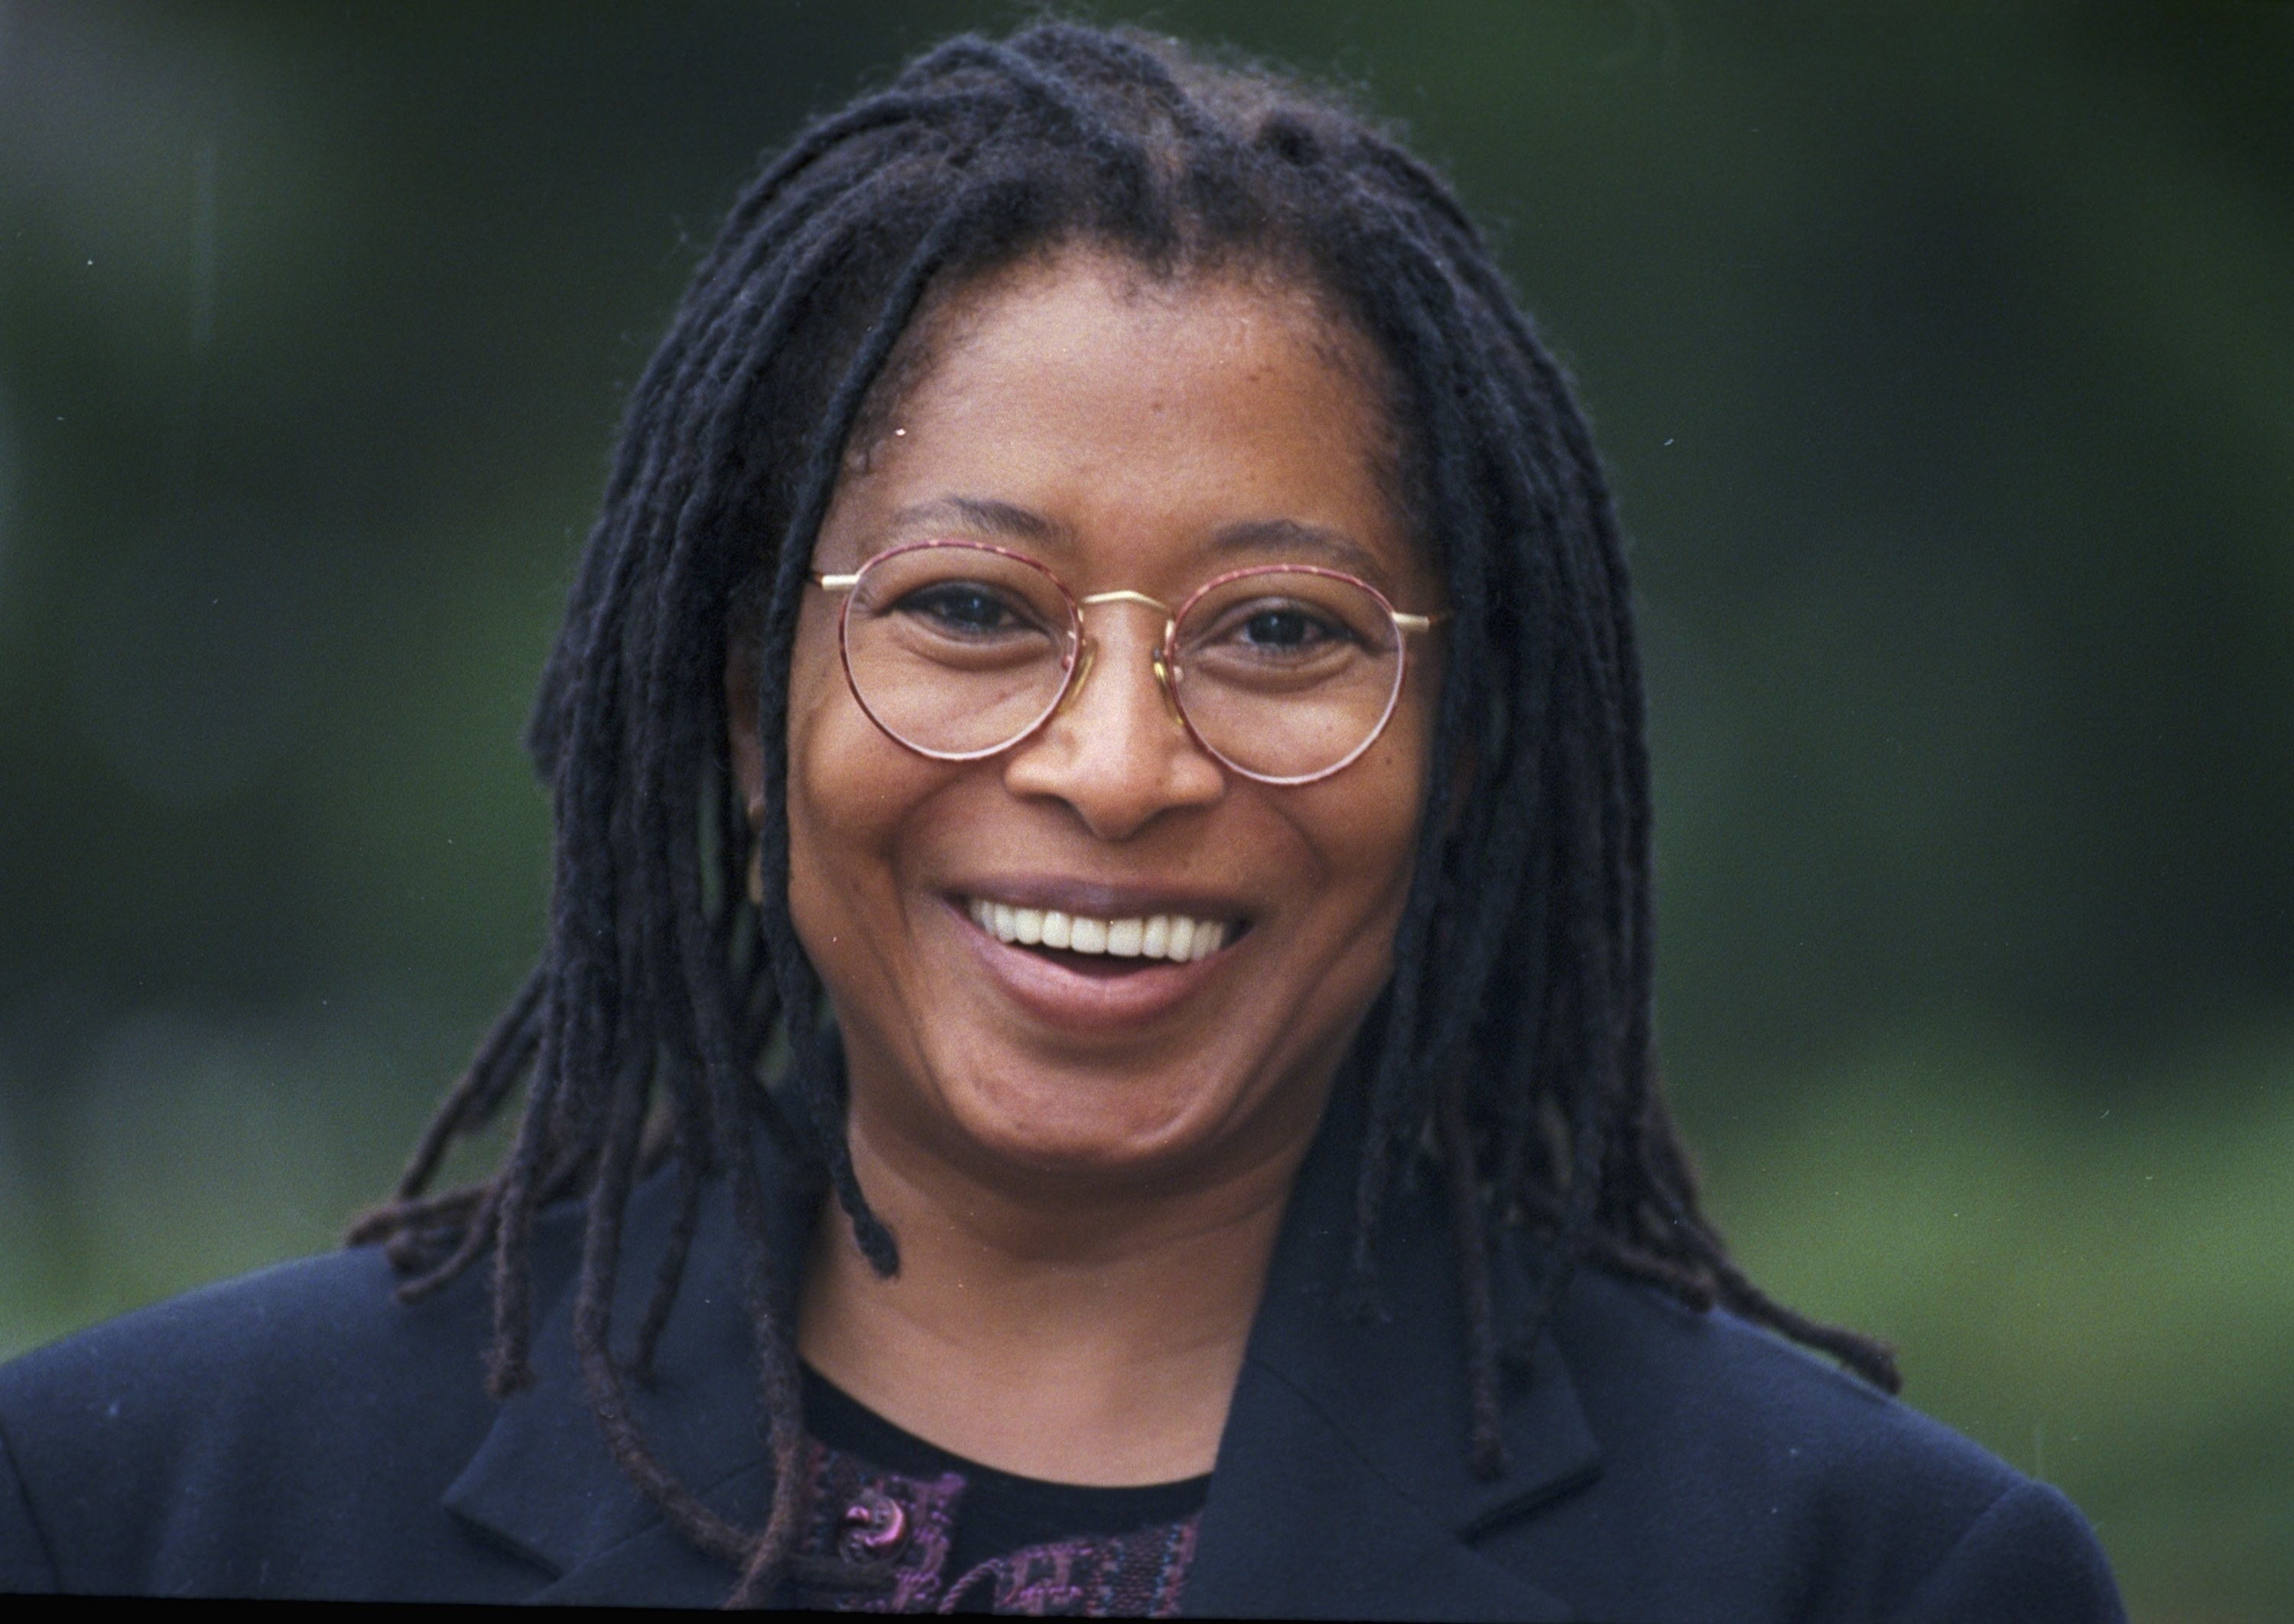 Alice Walker on the campus of Michigan State University on April 31, 1998